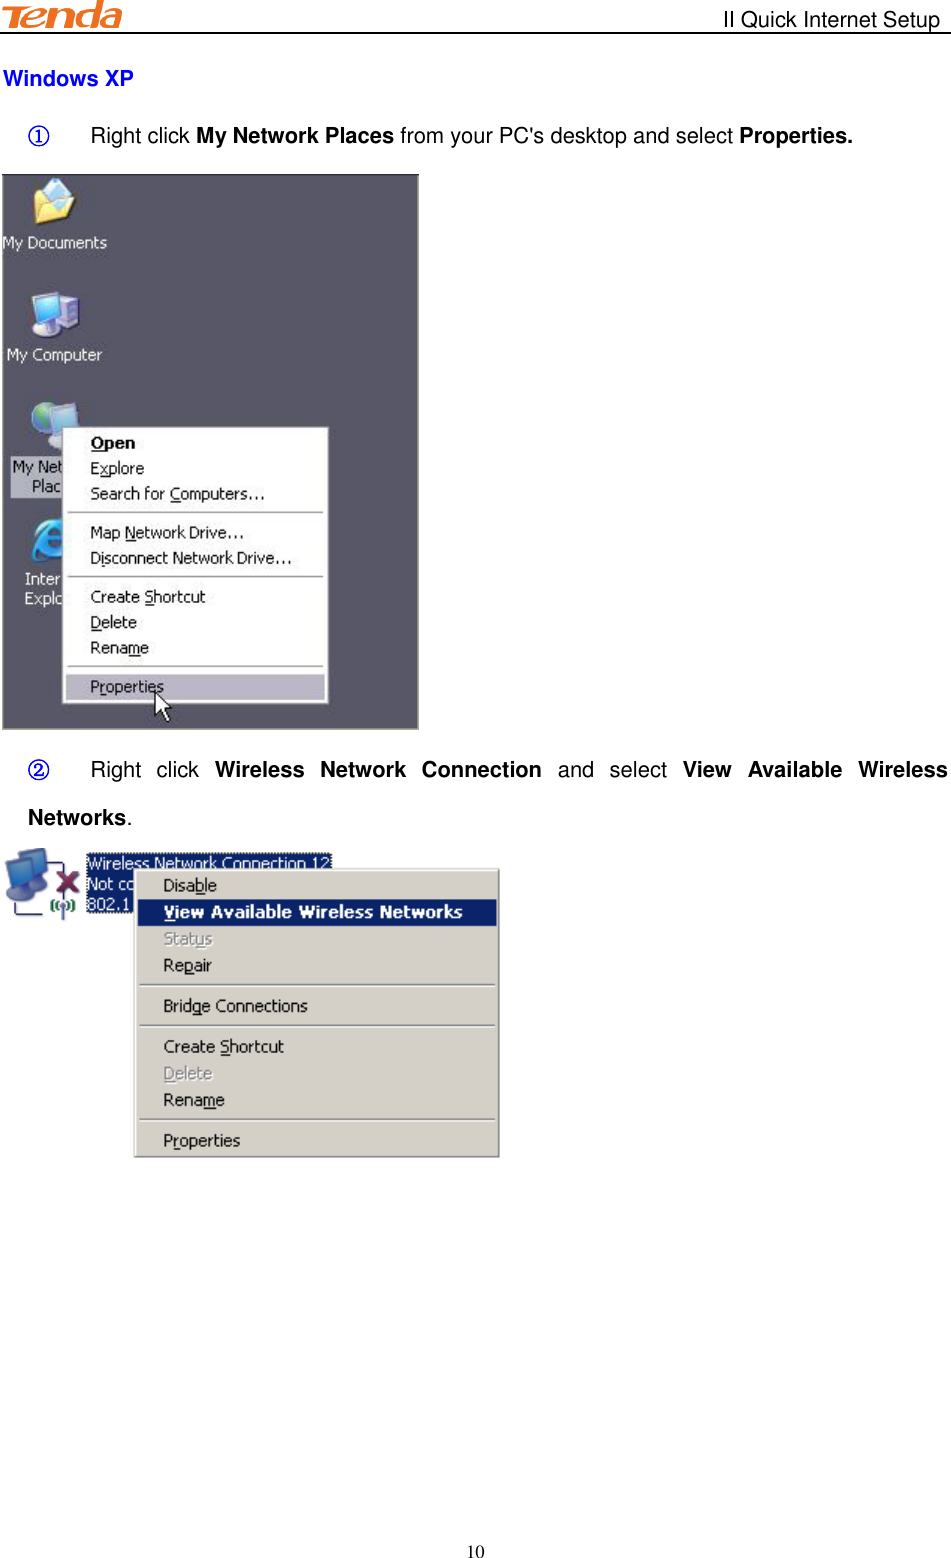                                                        II Quick Internet Setup         10 Windows XP ① Right click My Network Places from your PC&apos;s desktop and select Properties.  ② Right  click  Wireless  Network  Connection  and  select  View  Available  Wireless Networks.   